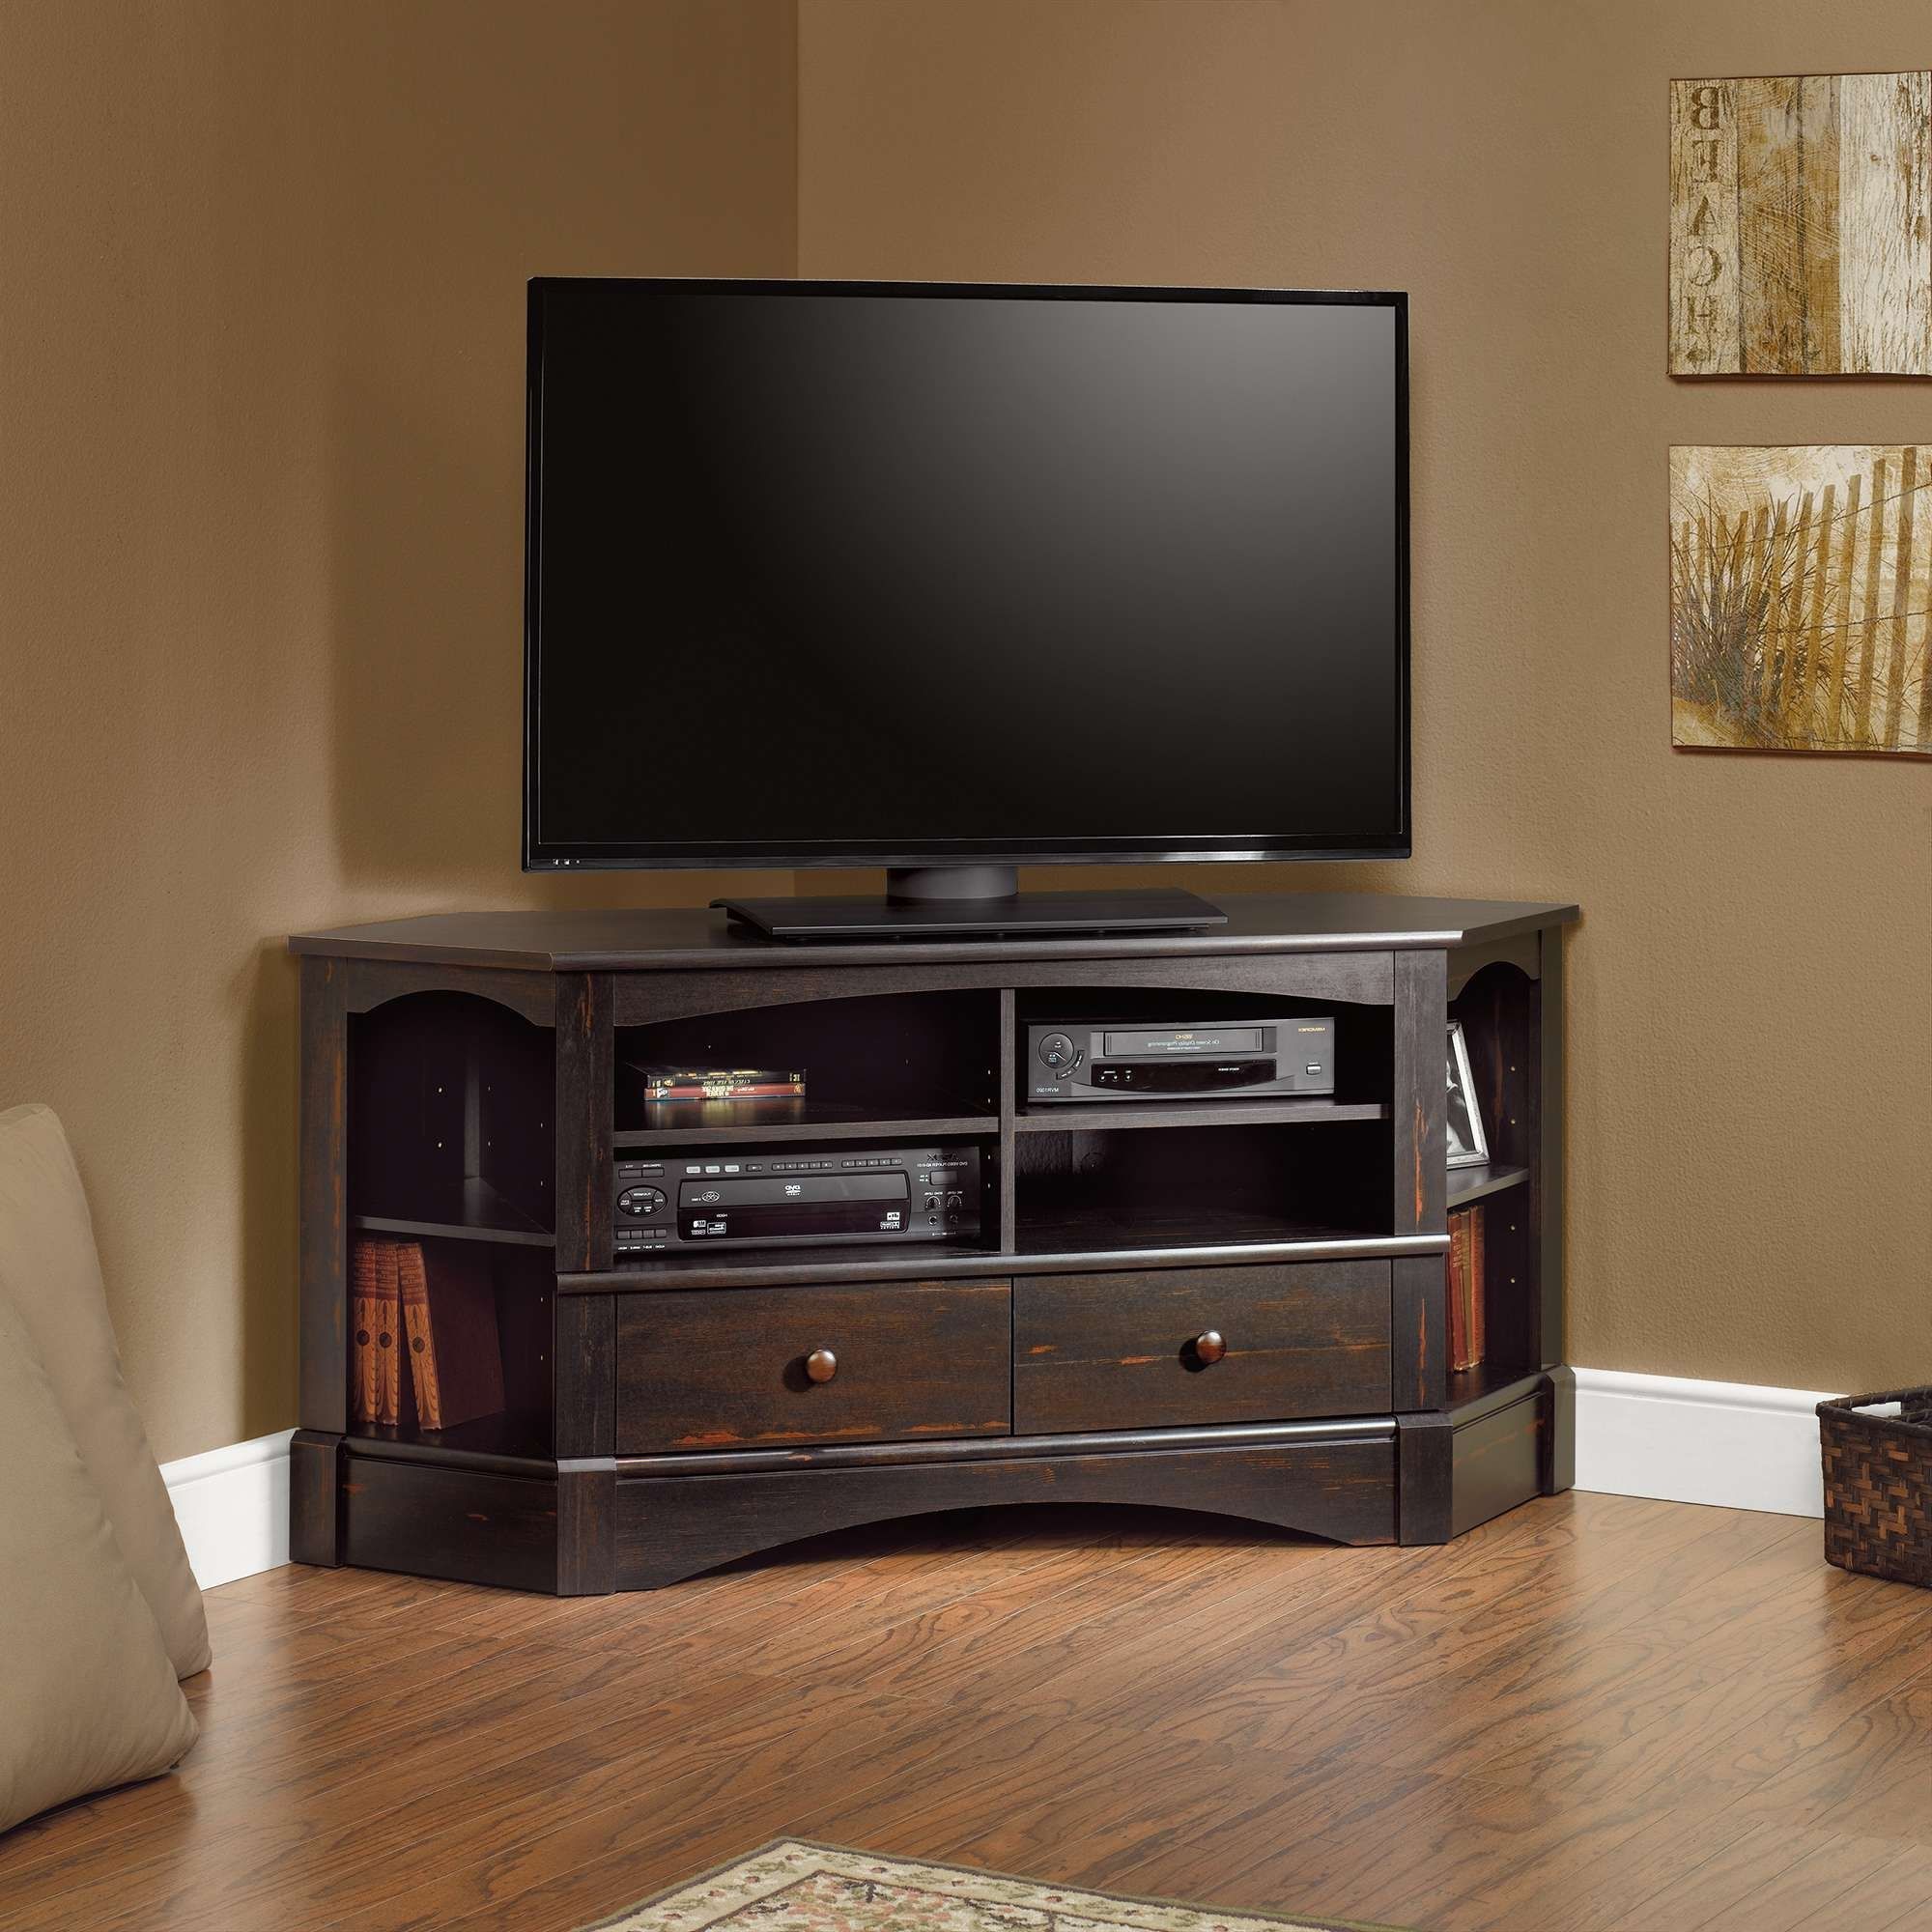 Furniture. Modern Dark Wood Corner Tv Stand And Media Cabinet Within Triangular Tv Stands (Gallery 2 of 15)